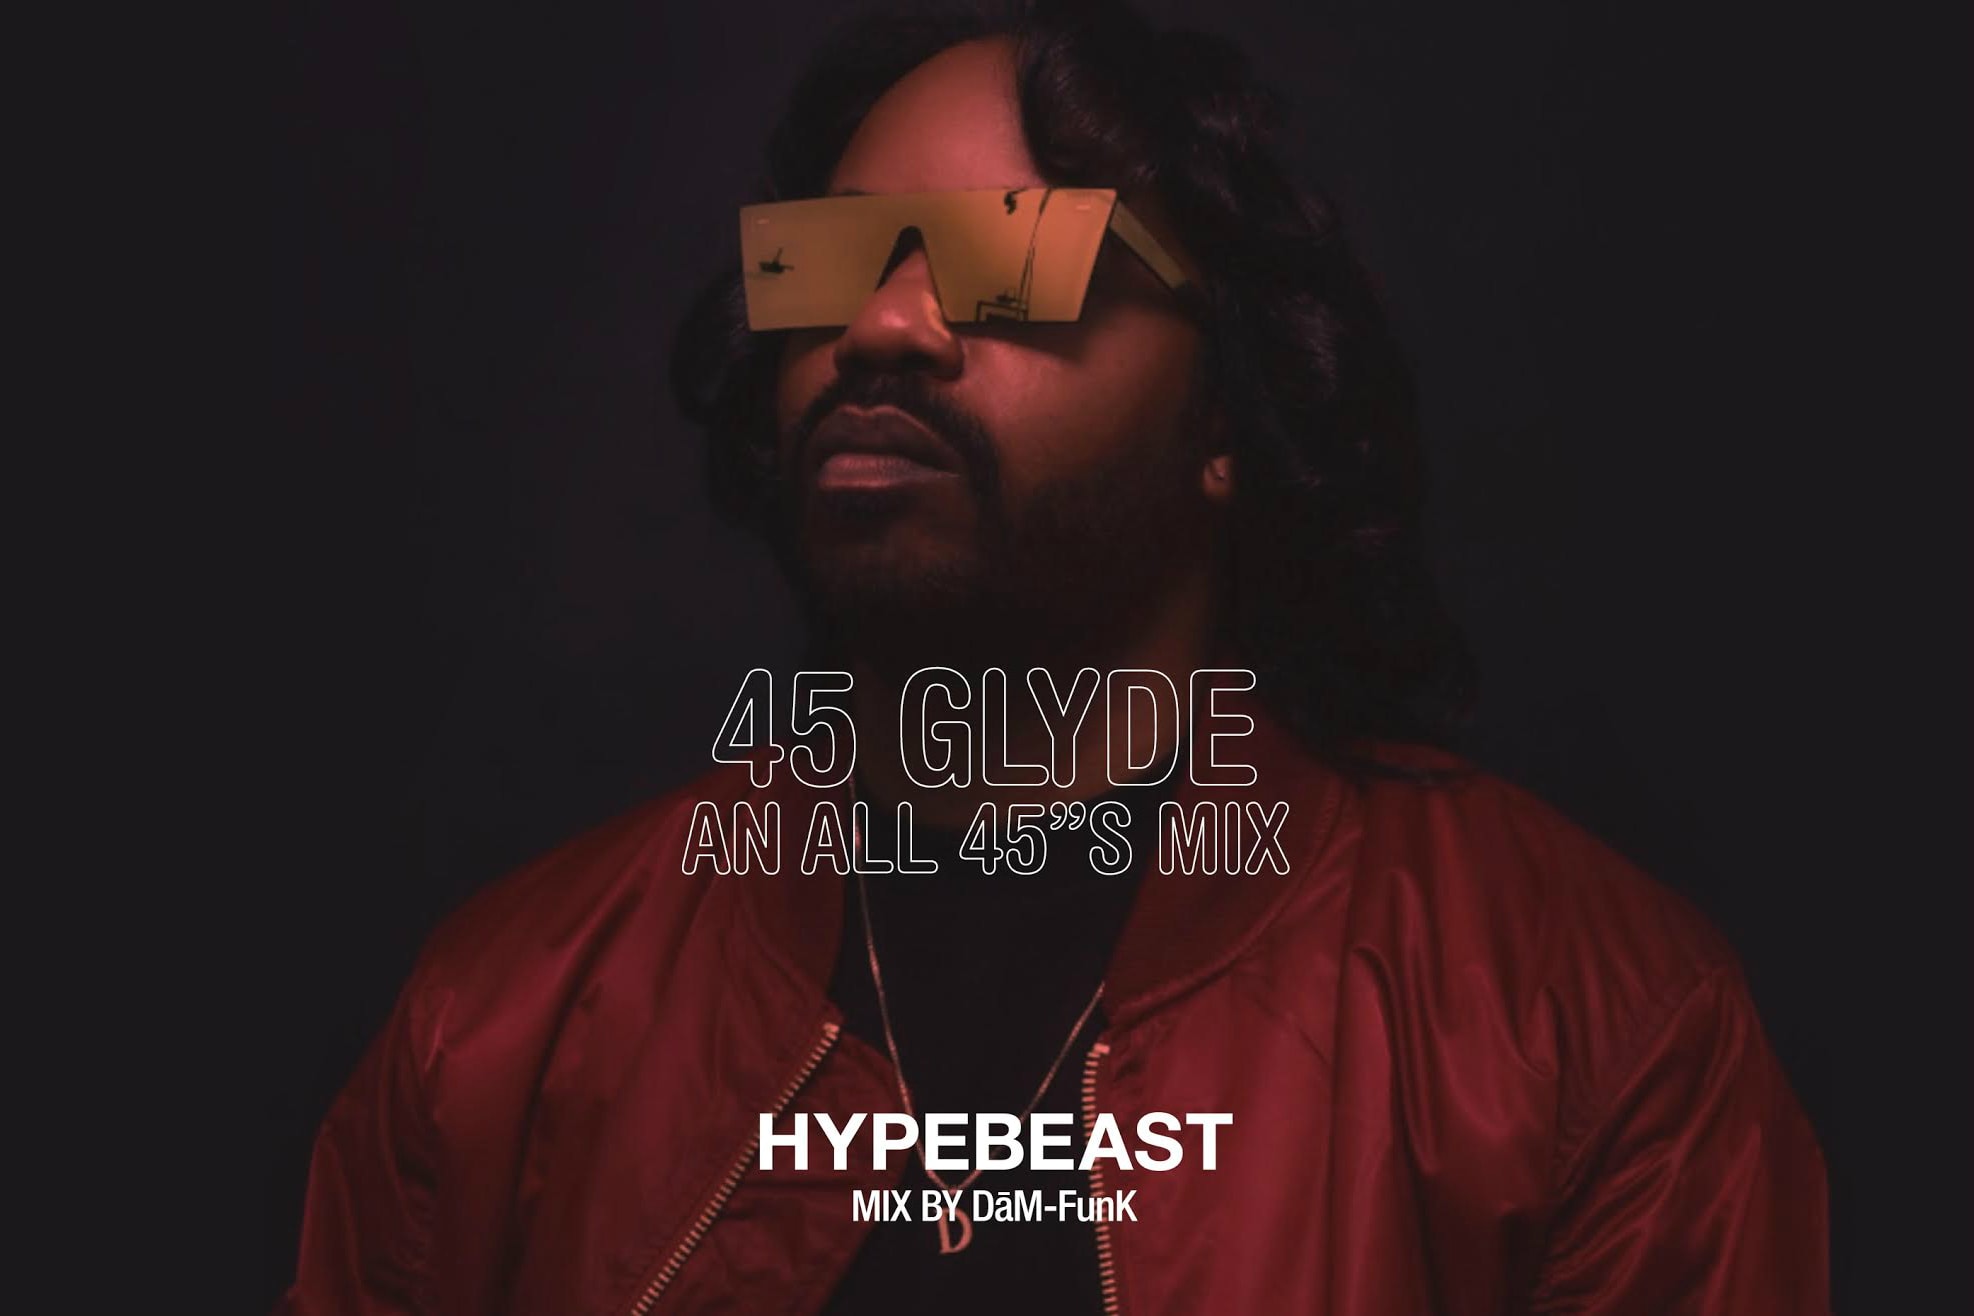 HYPEBEAST Mix Dam Funk Glydezone Album Leak Single Music Video EP Mixtape Download Stream Discography 2018 Live Show Performance Tour Dates Album Review Tracklist Remix 45 Glyde An All 45s Mix